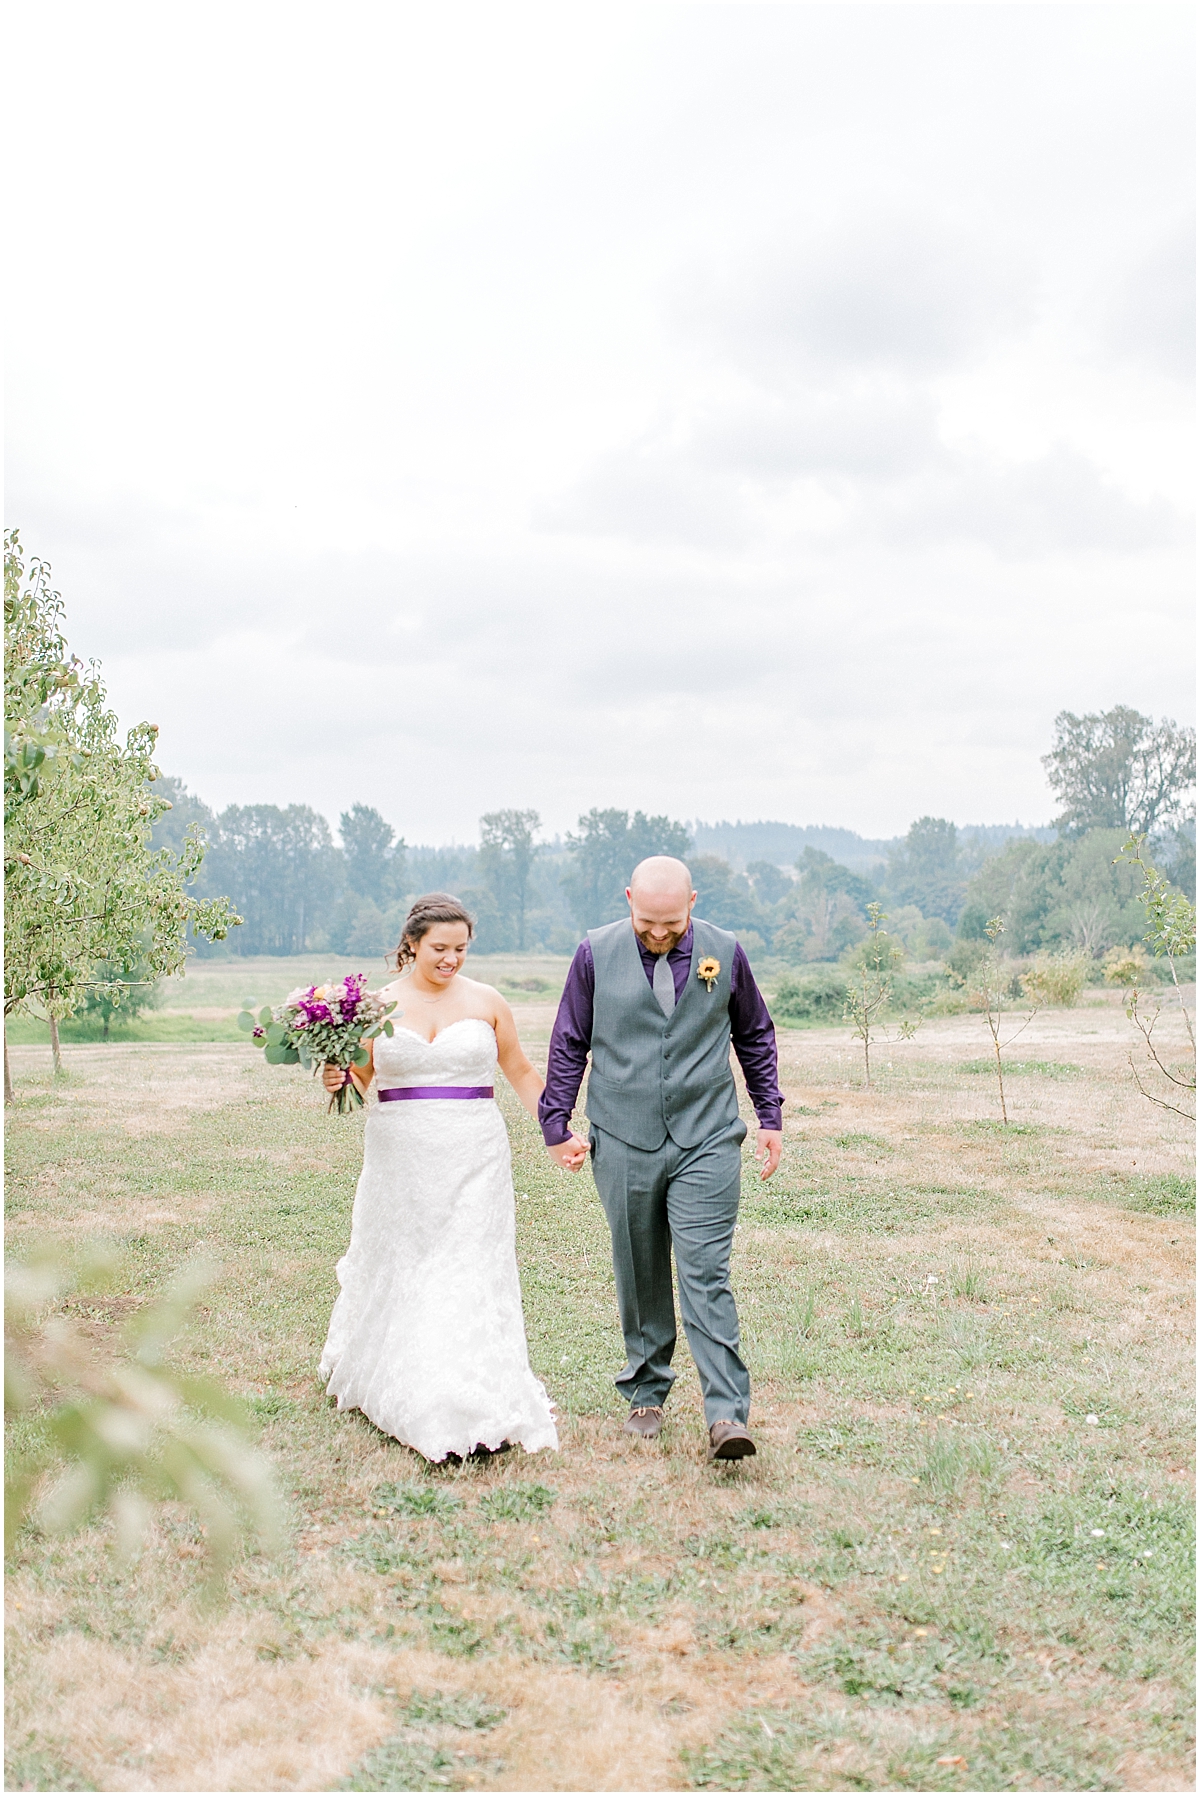 Sunflower themed wedding with purple accents, Emma Rose Company Seattle Wedding Photographer, Light and Airy photographer Kindred Presets Wedding Details PNW_0130.jpg